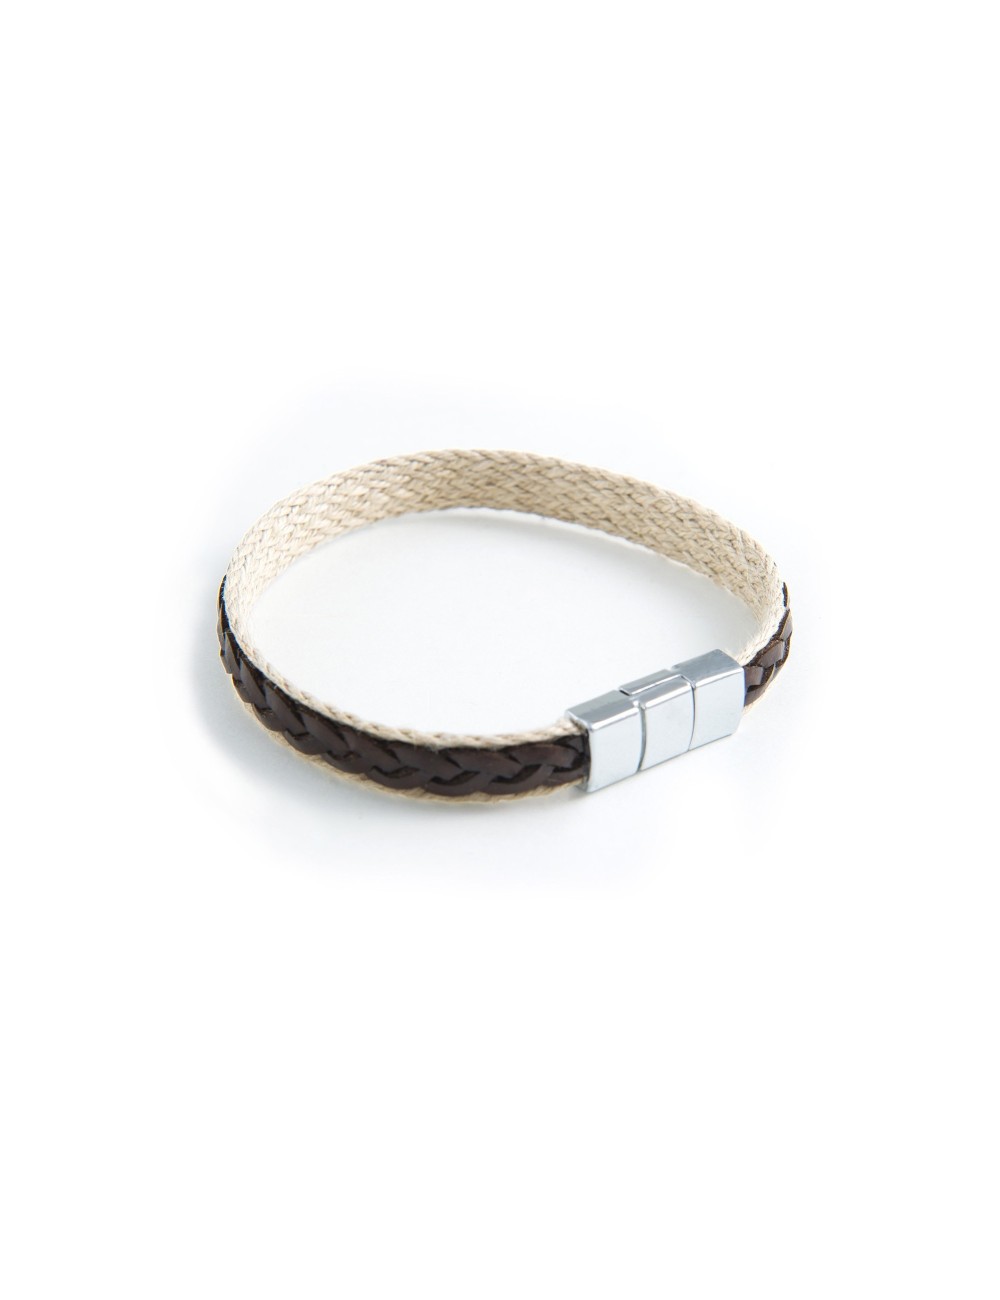 Bracelet in sisal and plaited leather